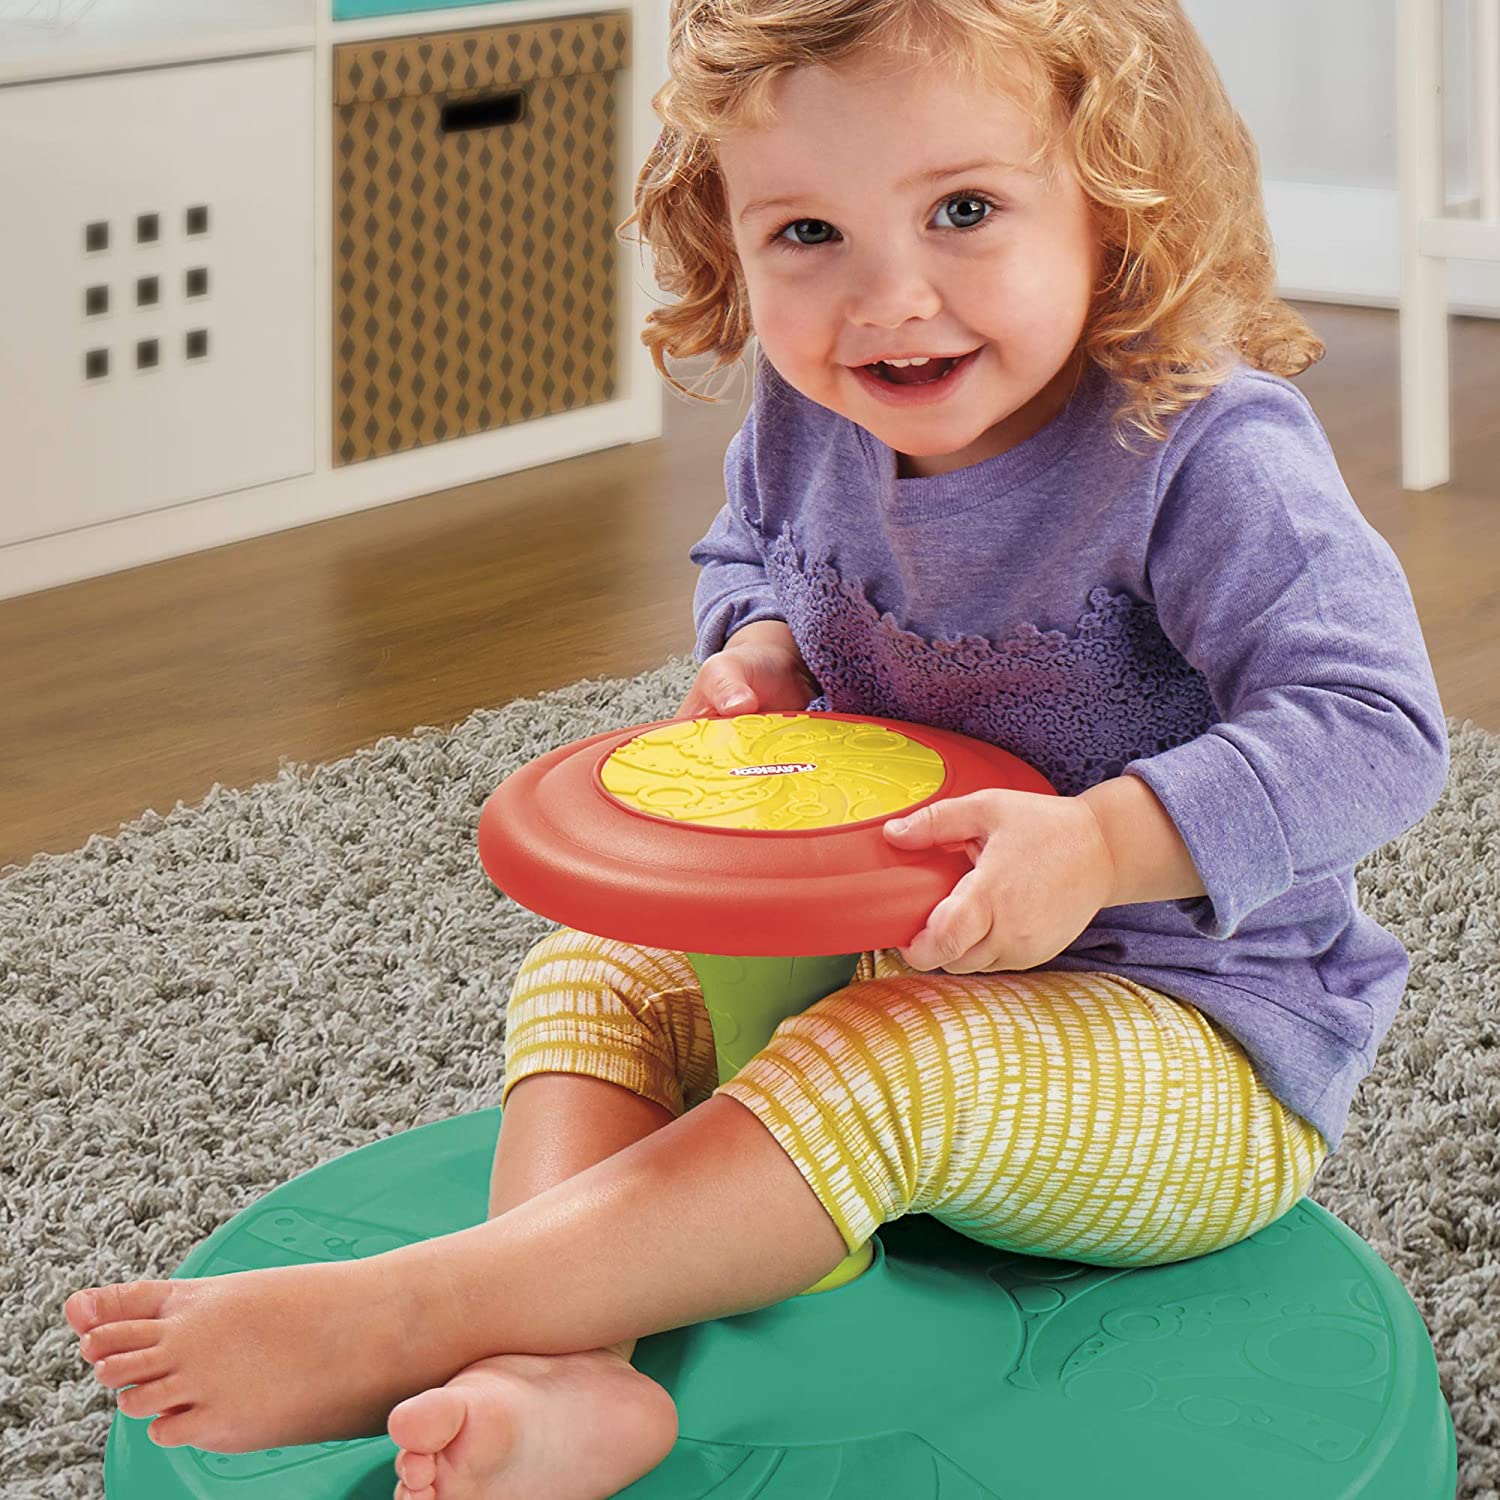 Playskool Sit n Spin Classic Spinning Activity Toy for Toddlers Ages Over 18 Months - image 5 of 5